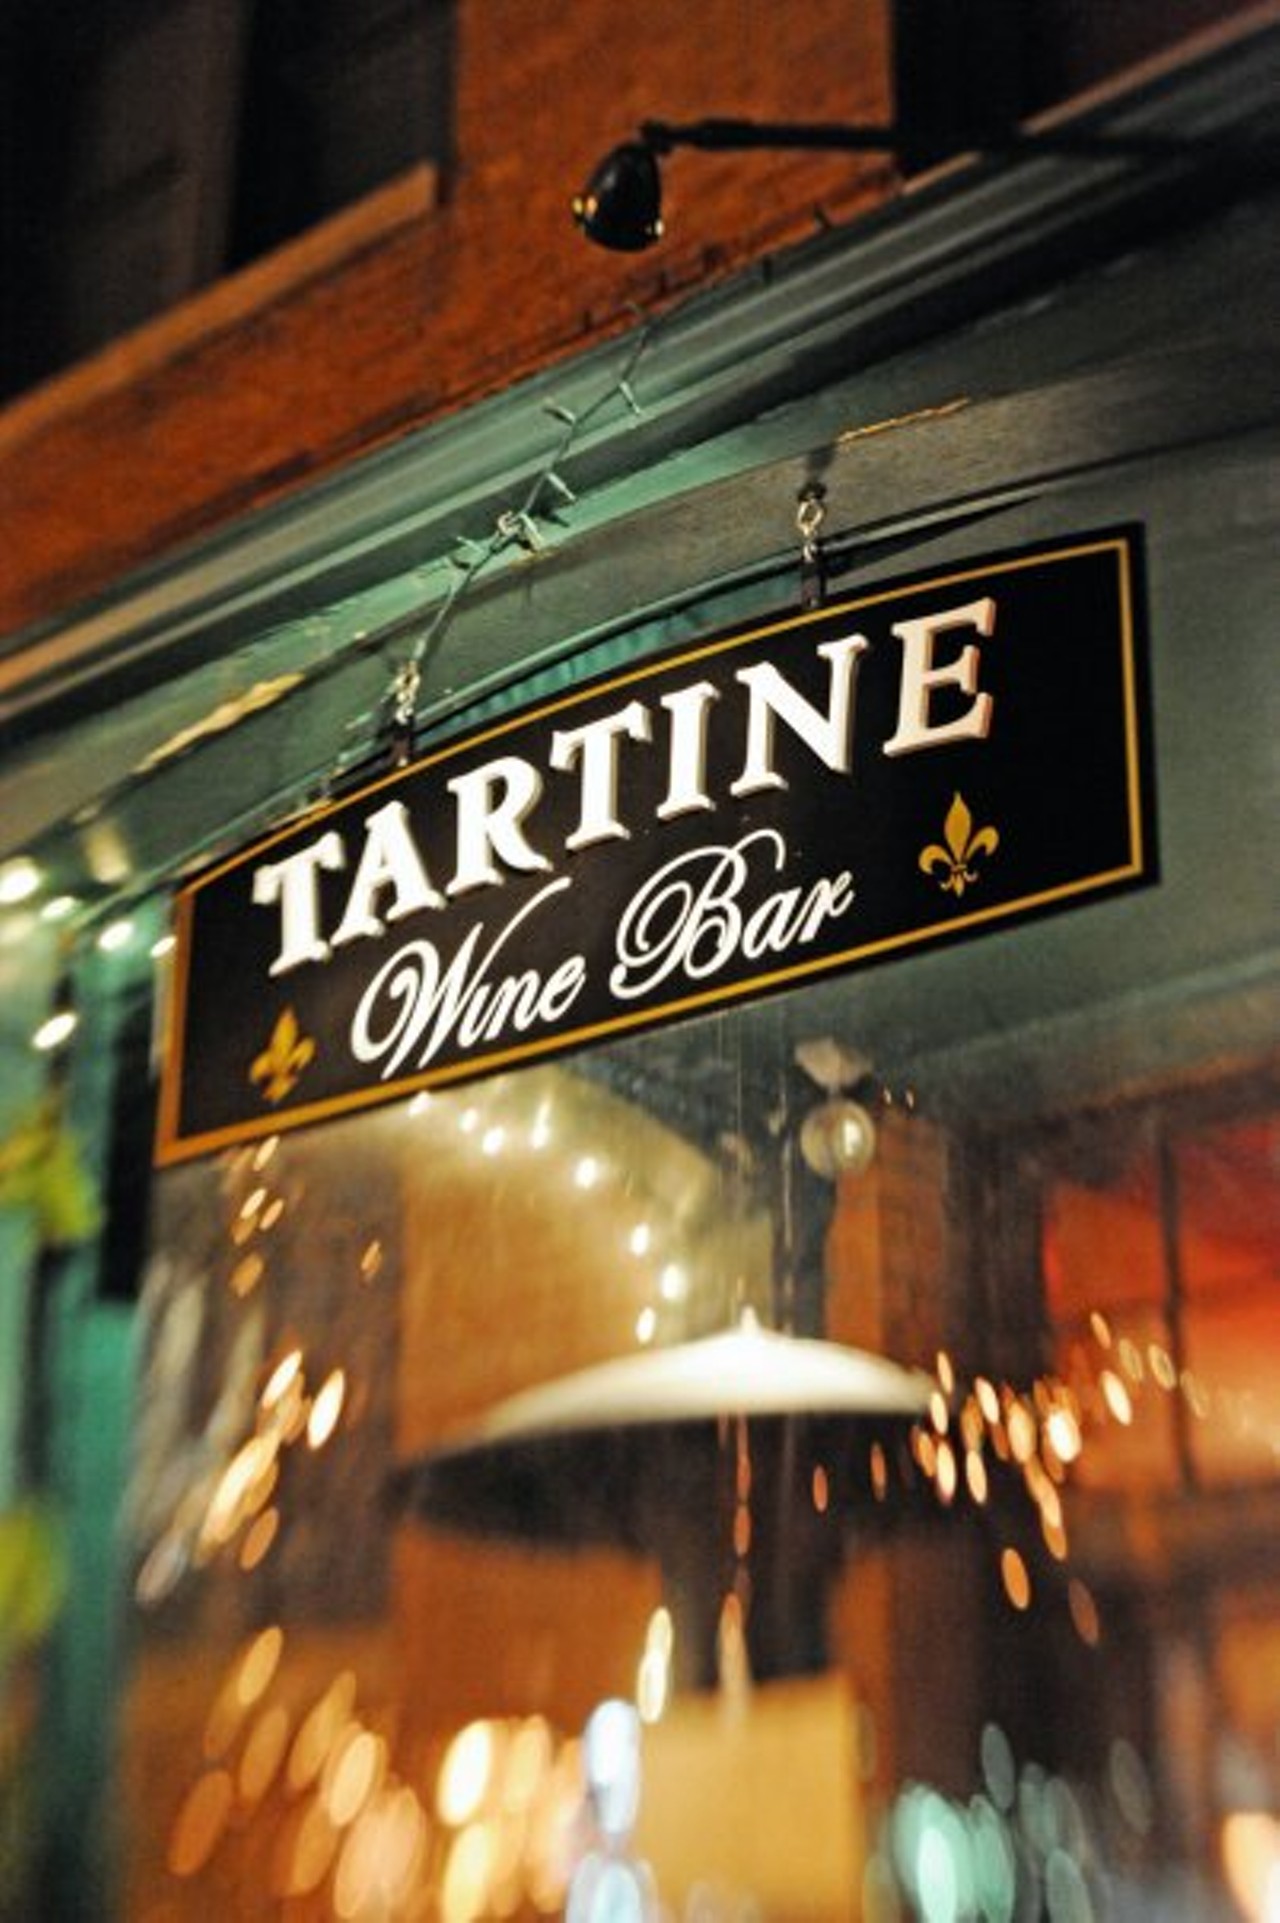 Tartine Bistro: This Rocky River French restaurant is so quaint and character filled it is sure to charm any date you choose. Call (440) 331-0800 for more info. (Photo via Facebook)